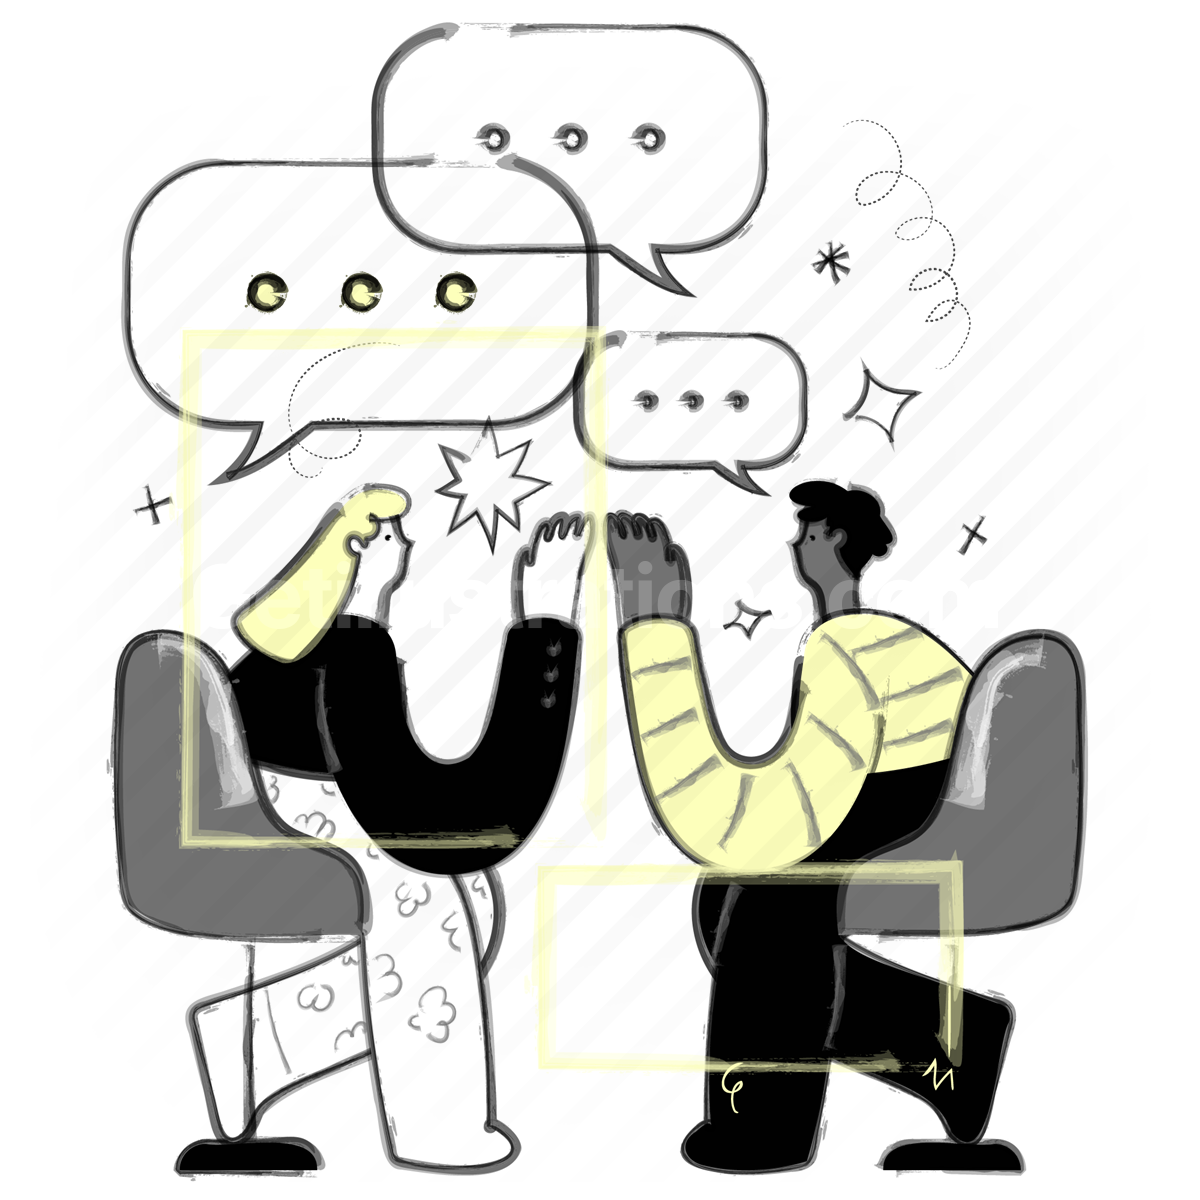 meeting, discussion, talk, message, chat, conversation, man, woman, people